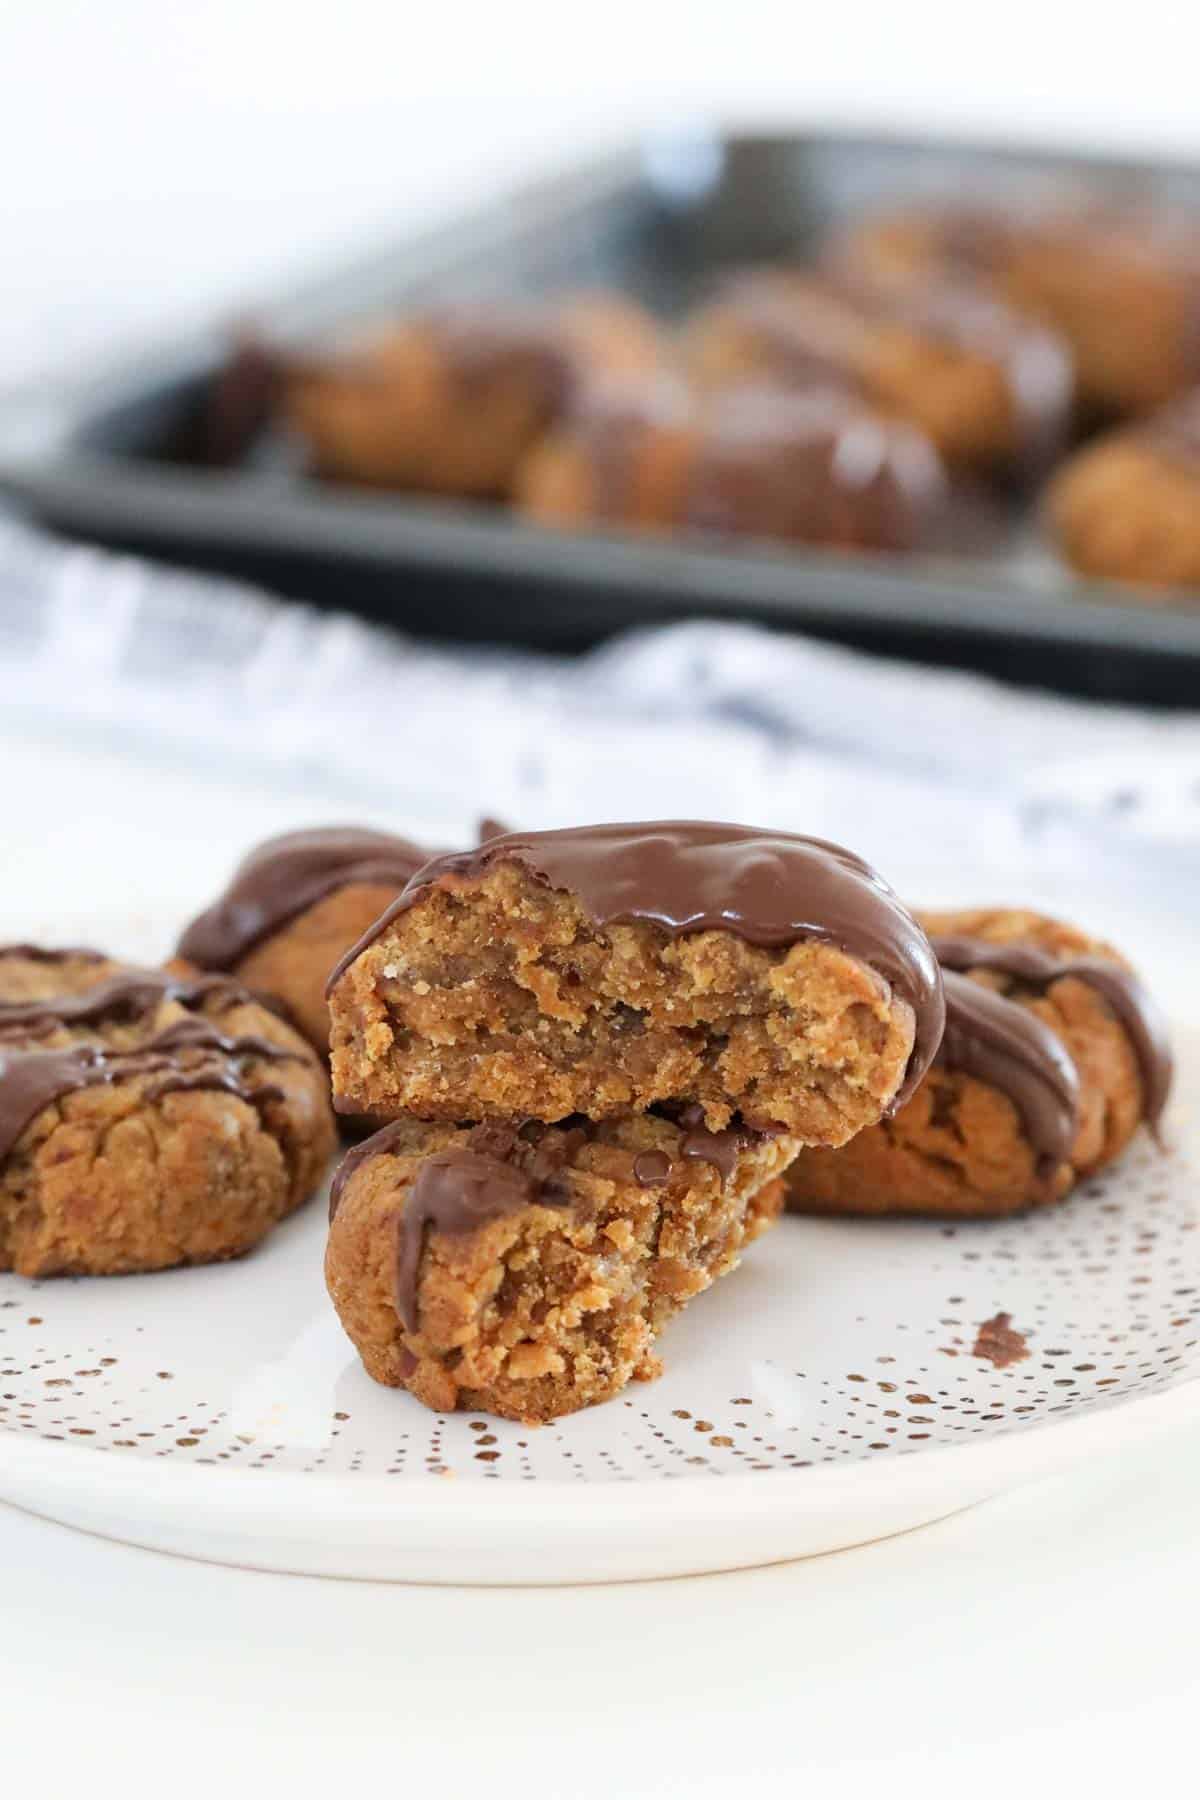 A plate of date cookies drizzled with chocolate, with one cookie broken in half to show the chewy centre.